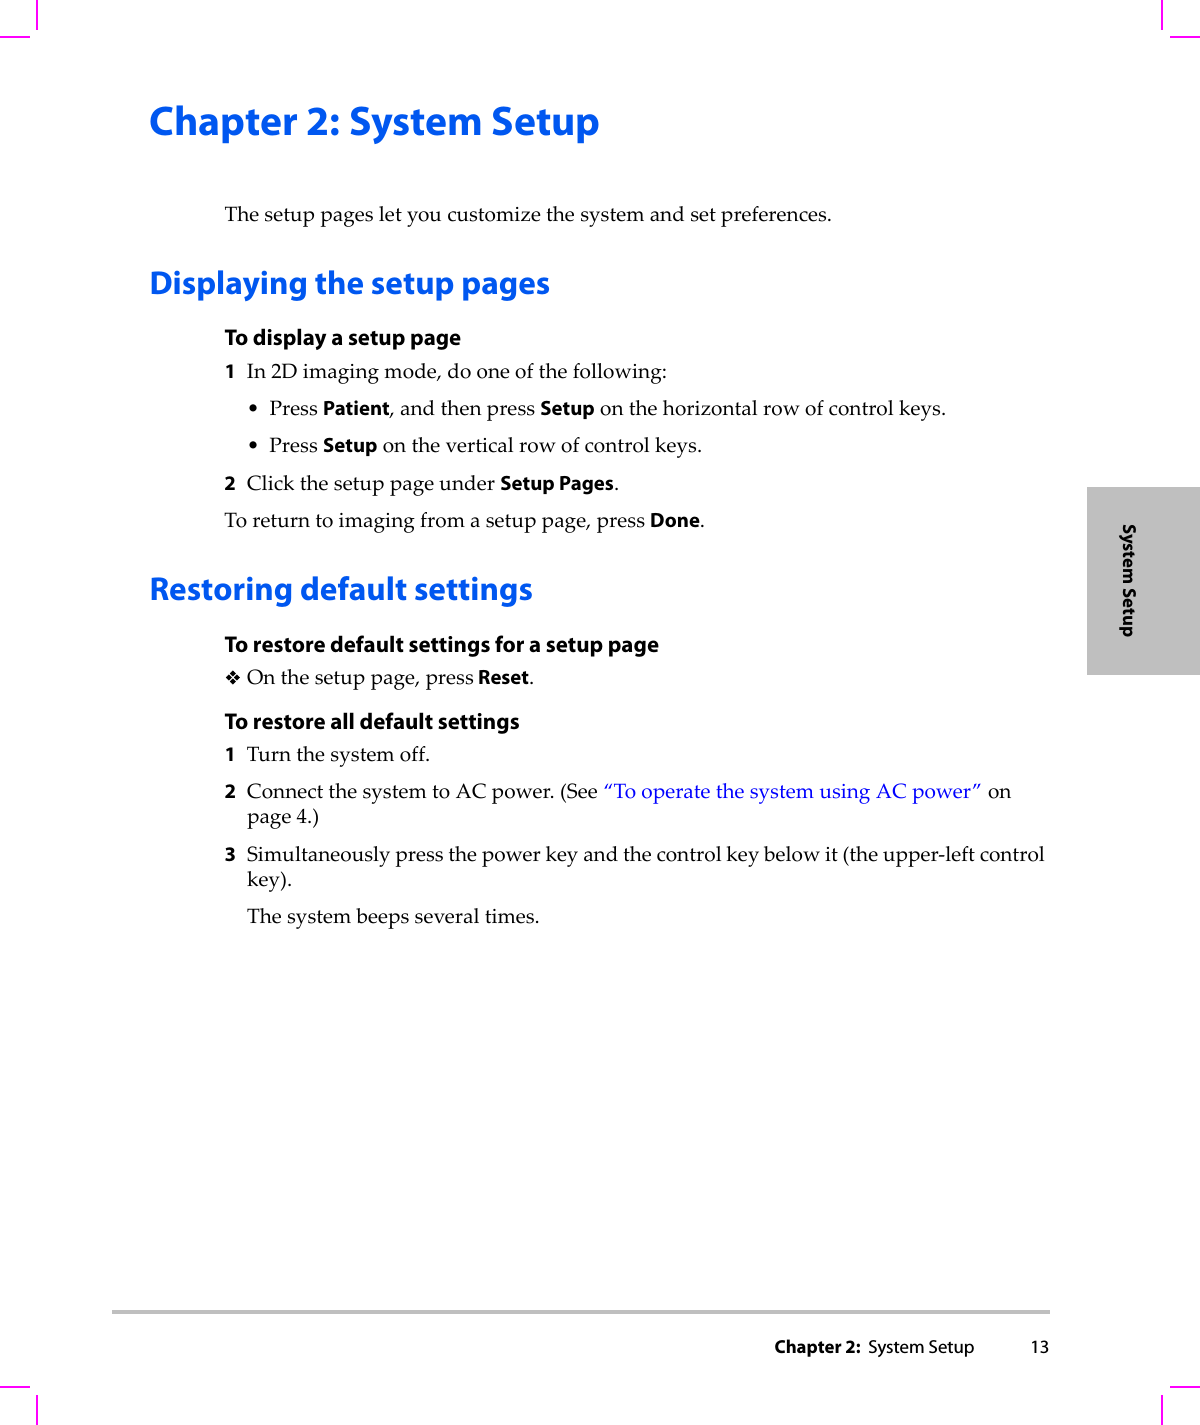 Chapter 2:  System Setup 13System SetupChapter 2: System SetupThesetuppagesletyoucustomizethesystemandsetpreferences.Displaying the setup pagesTo display a setup page1In2Dimagingmode,dooneofthefollowing:•PressPatient,andthenpressSetuponthehorizontalrowofcontrolkeys.•PressSetupontheverticalrowofcontrolkeys.2ClickthesetuppageunderSetup Pages.Toreturntoimagingfromasetuppage,pressDone.Restoring default settingsTo restore default settings for a setup pageOnthesetuppage,press Reset.To restore all default settings1Turnthesystemoff.2ConnectthesystemtoACpower.(See“TooperatethesystemusingACpower”onpage 4.)3Simultaneouslypressthepowerkeyandthecontrolkeybelowit(theupper‐leftcontrolkey).Thesystembeepsseveraltimes.